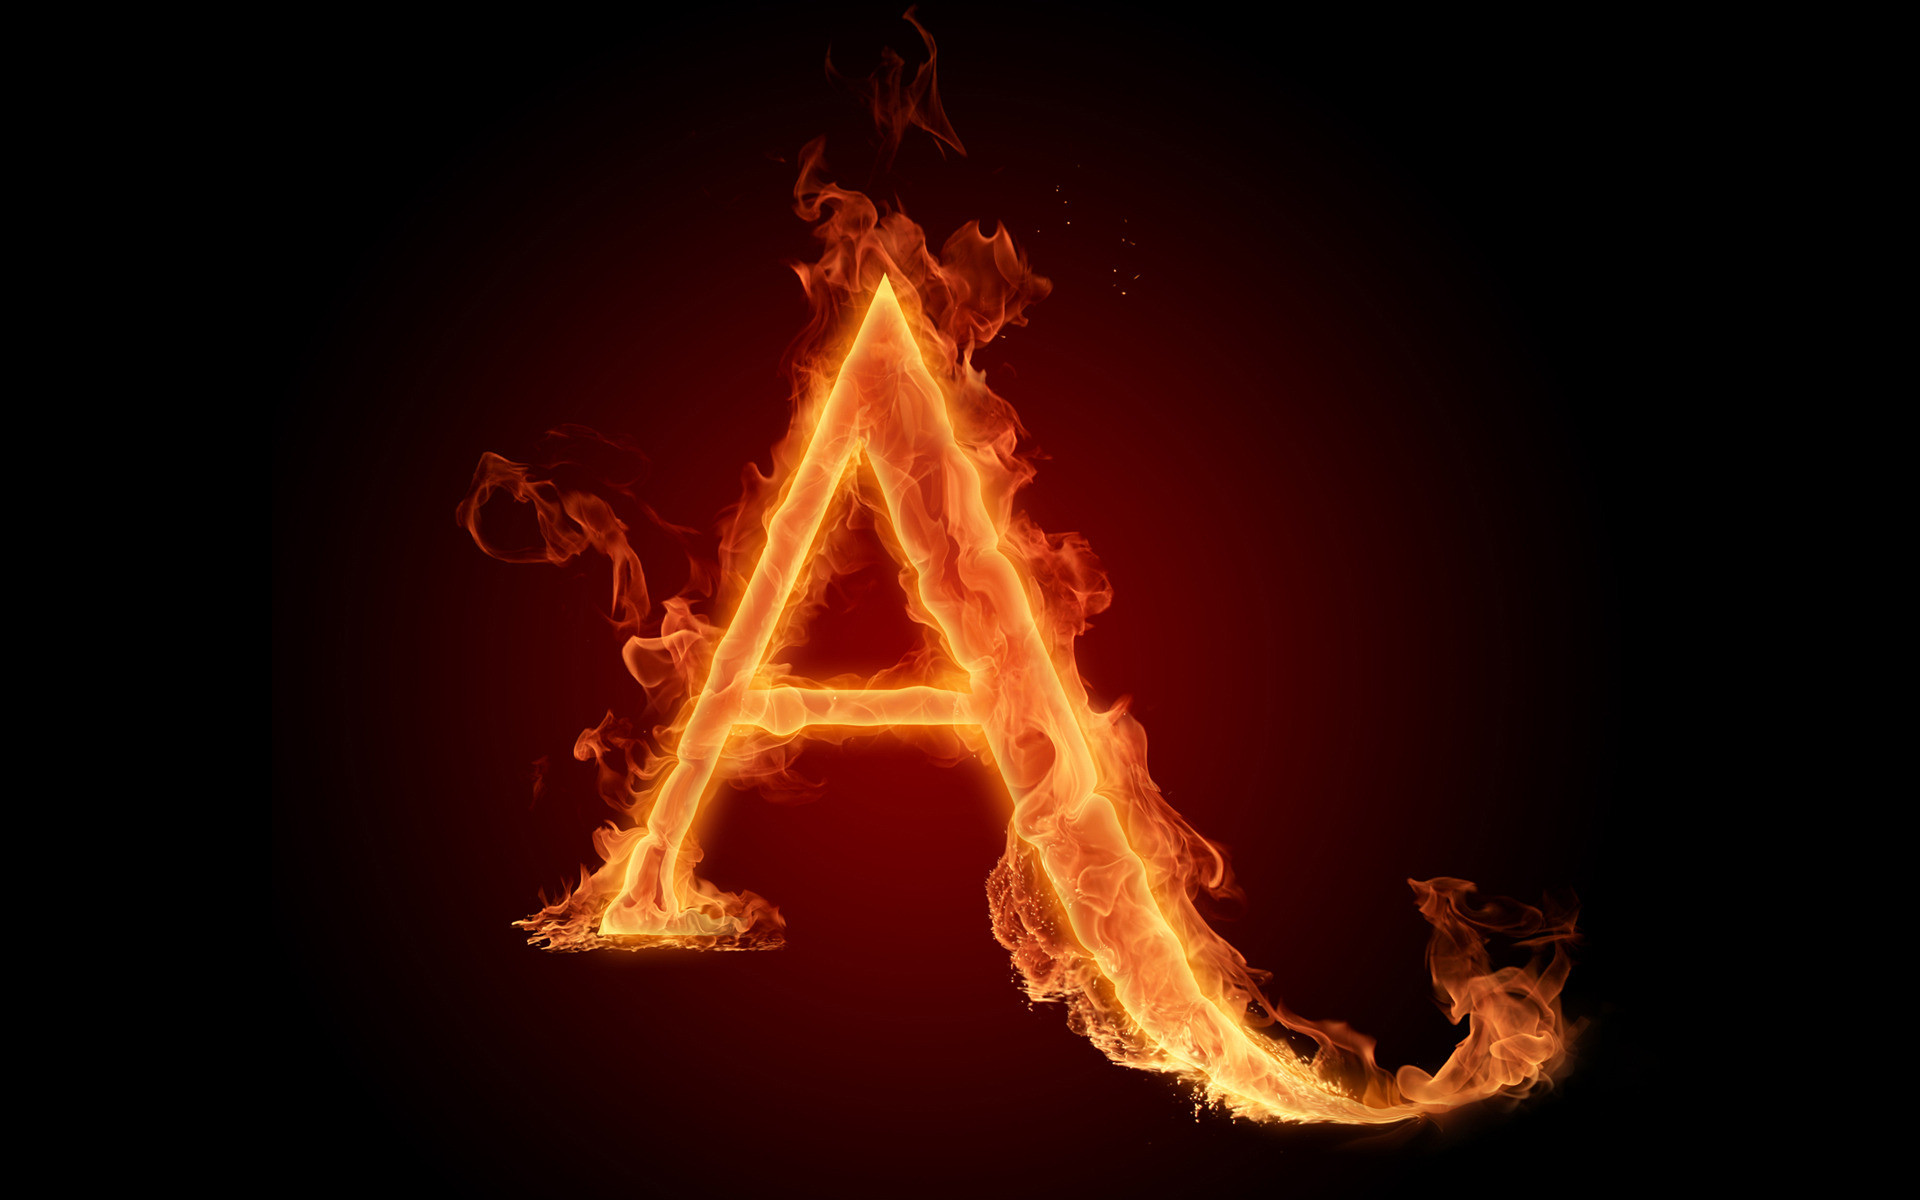 1920x1200 The fiery English alphabet picture A Wallpapers - HD Wallpapers 73615